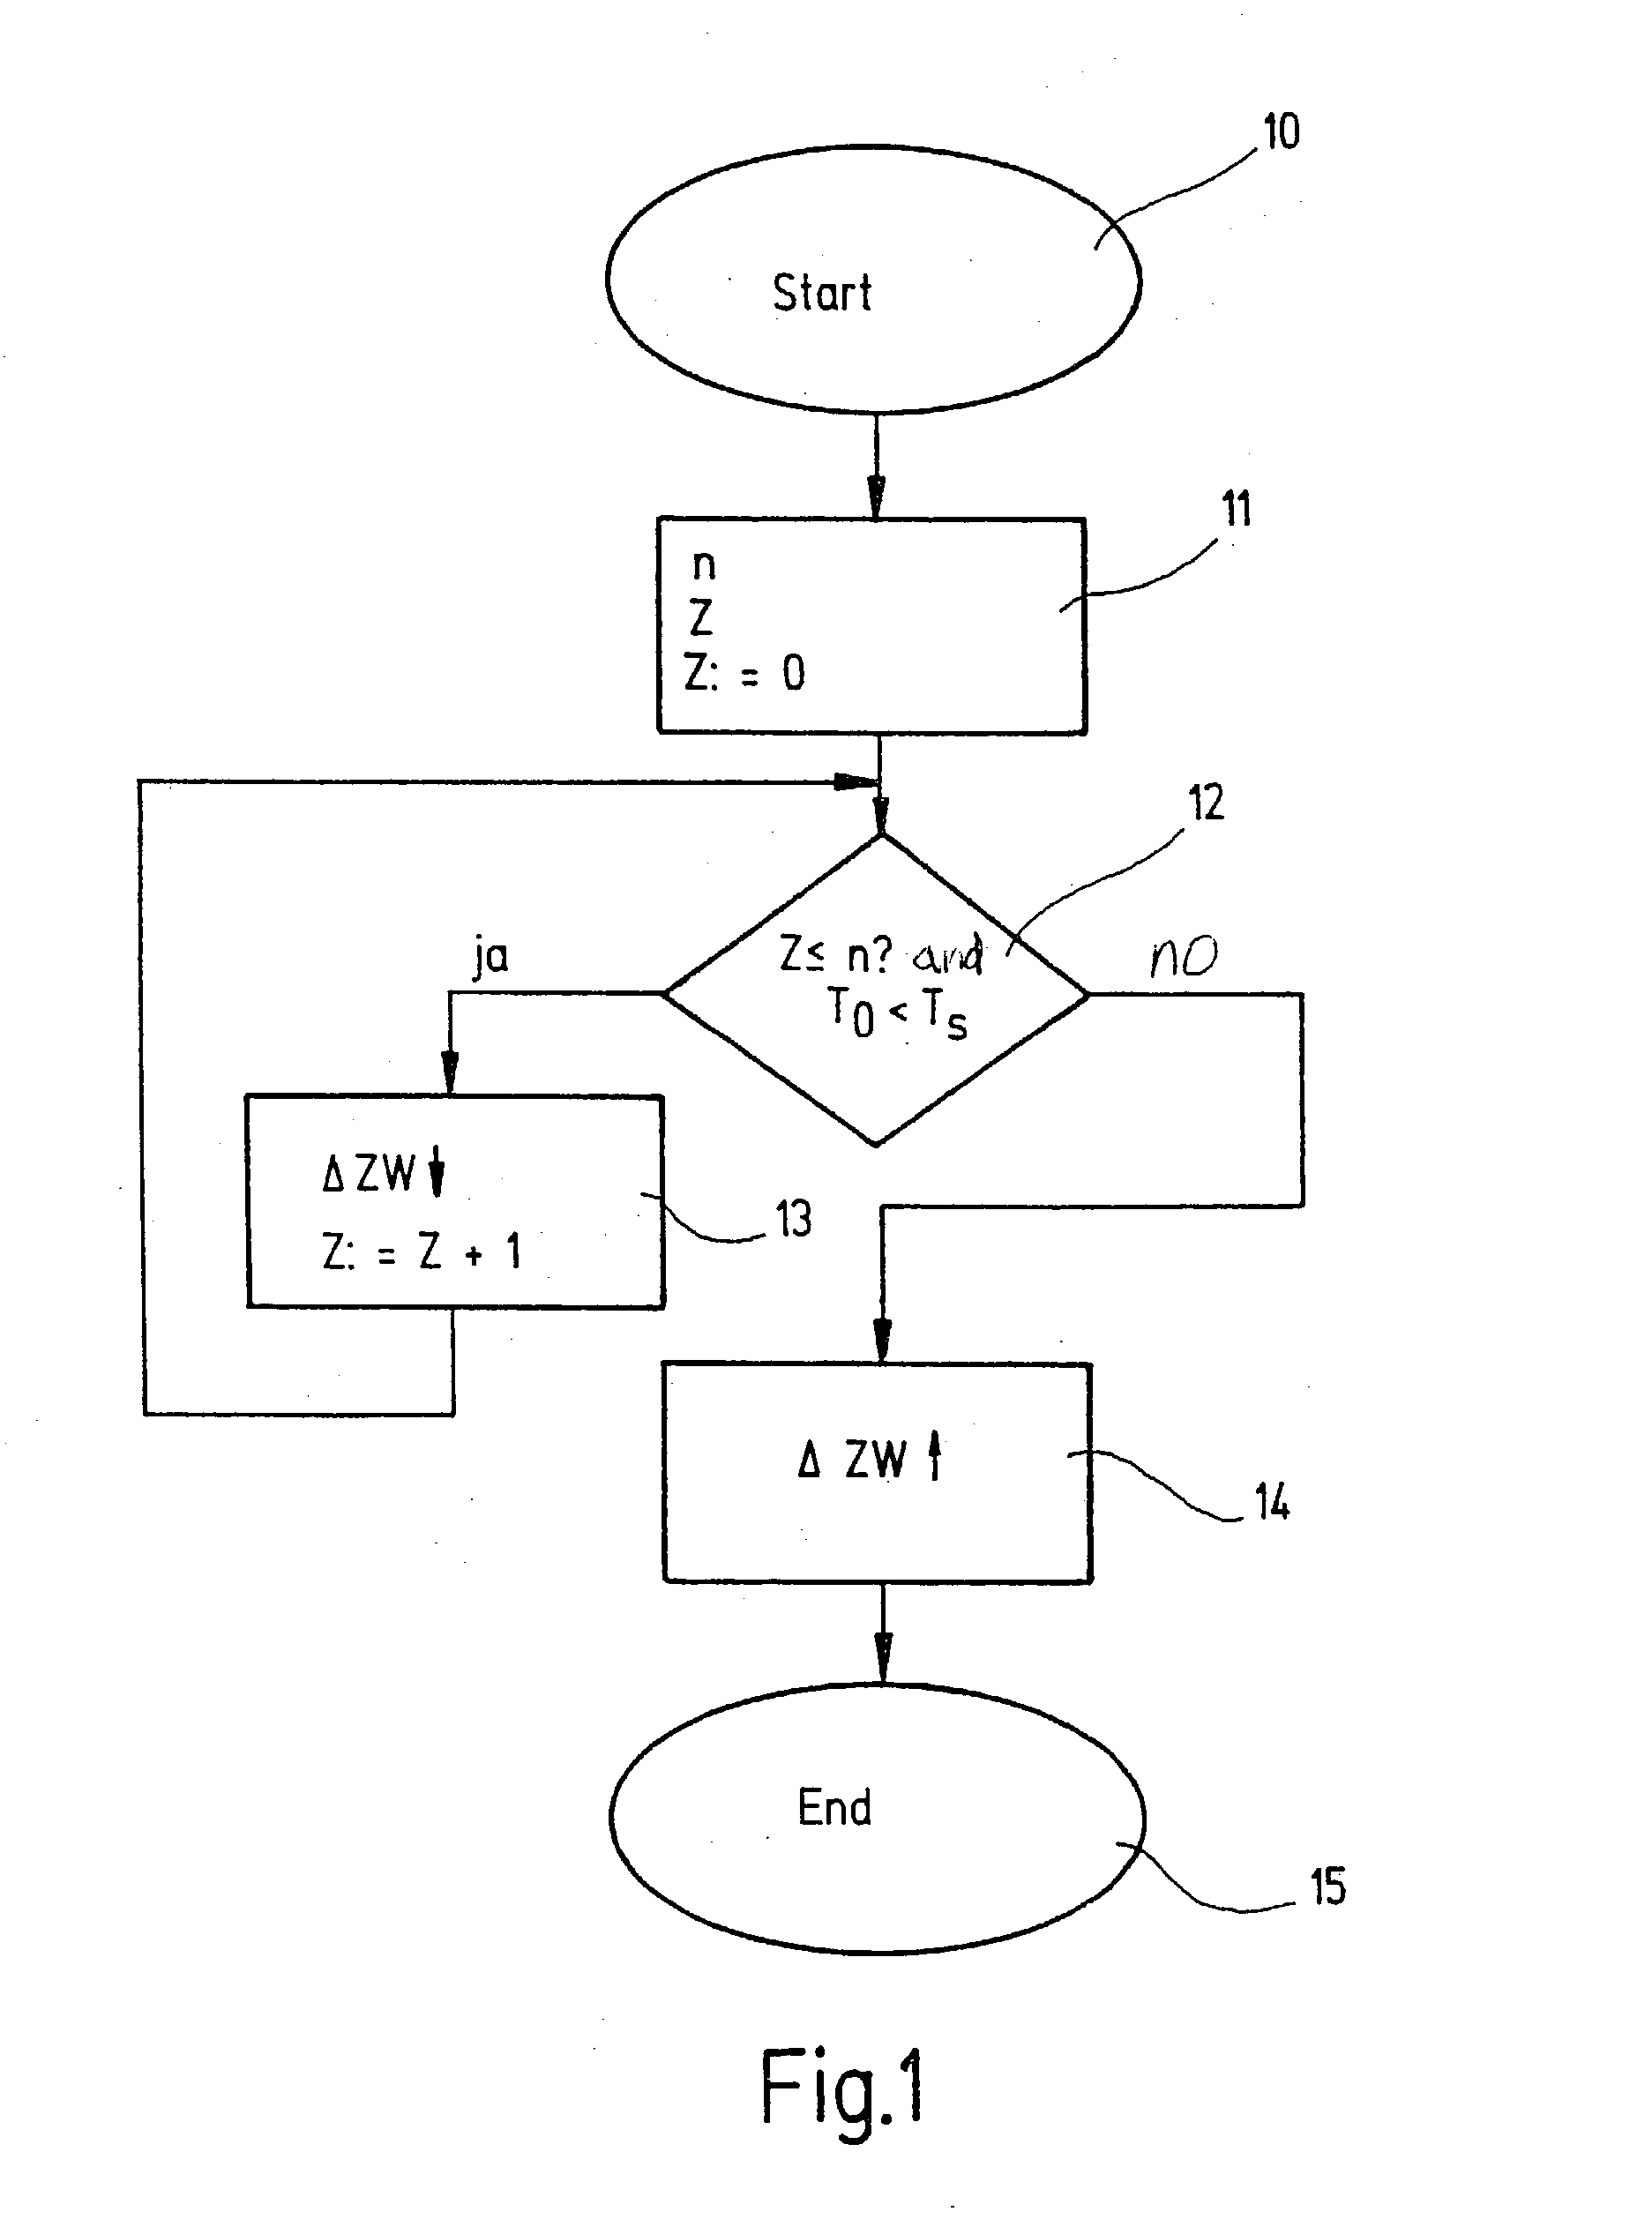 Method for operating an otto-cycle internal combustion engine with fuel injection on a cold start